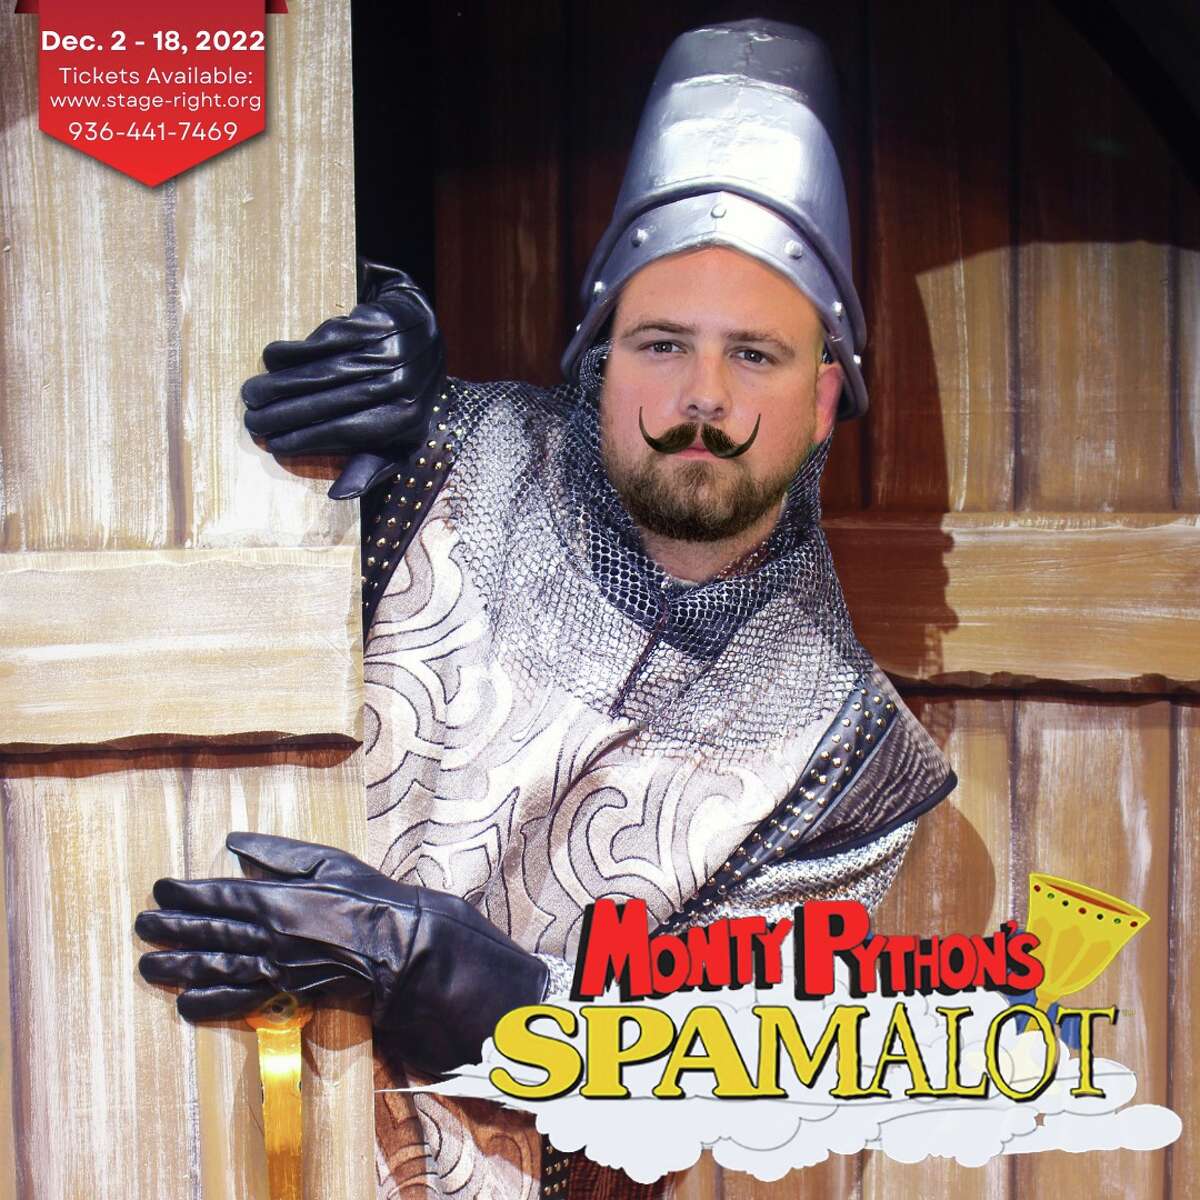  To celebrate the holiday season in Conroe, Stage Right of Texas, the resident theater troupe of the historic Crighton Theatre, presents the musical comedy “Spamalot.” The show opens tonight and continues weekends through Dec. 18 . Matinees are at 2 p.m. Sunday, Dec. 11 and Dec. 18. 